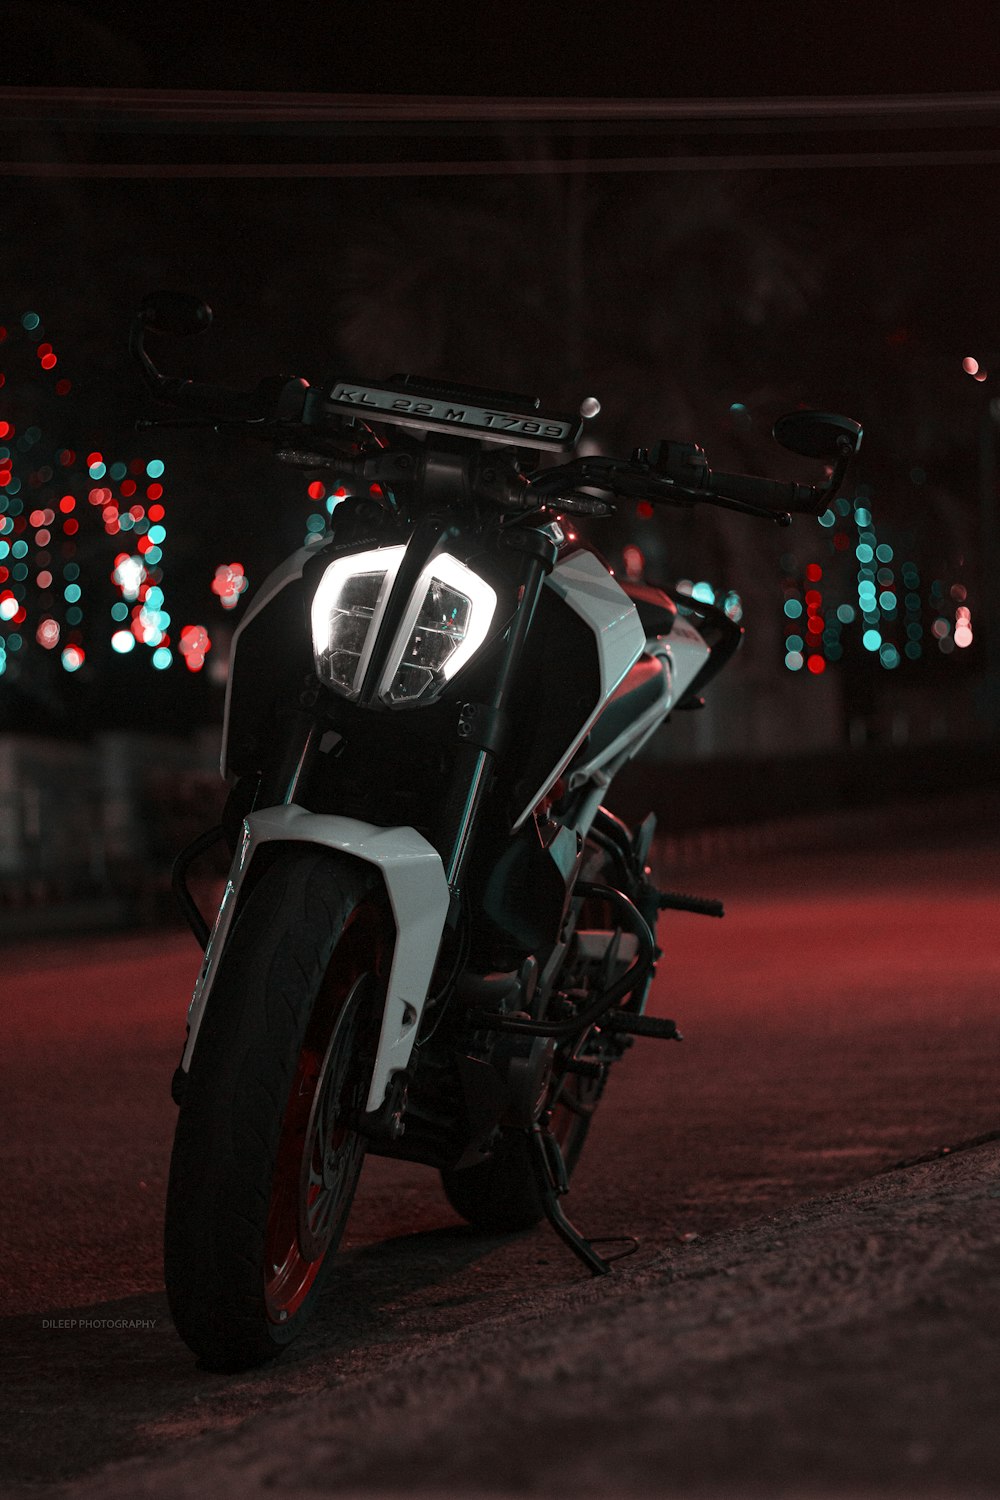 black and white motorcycle on road during night time